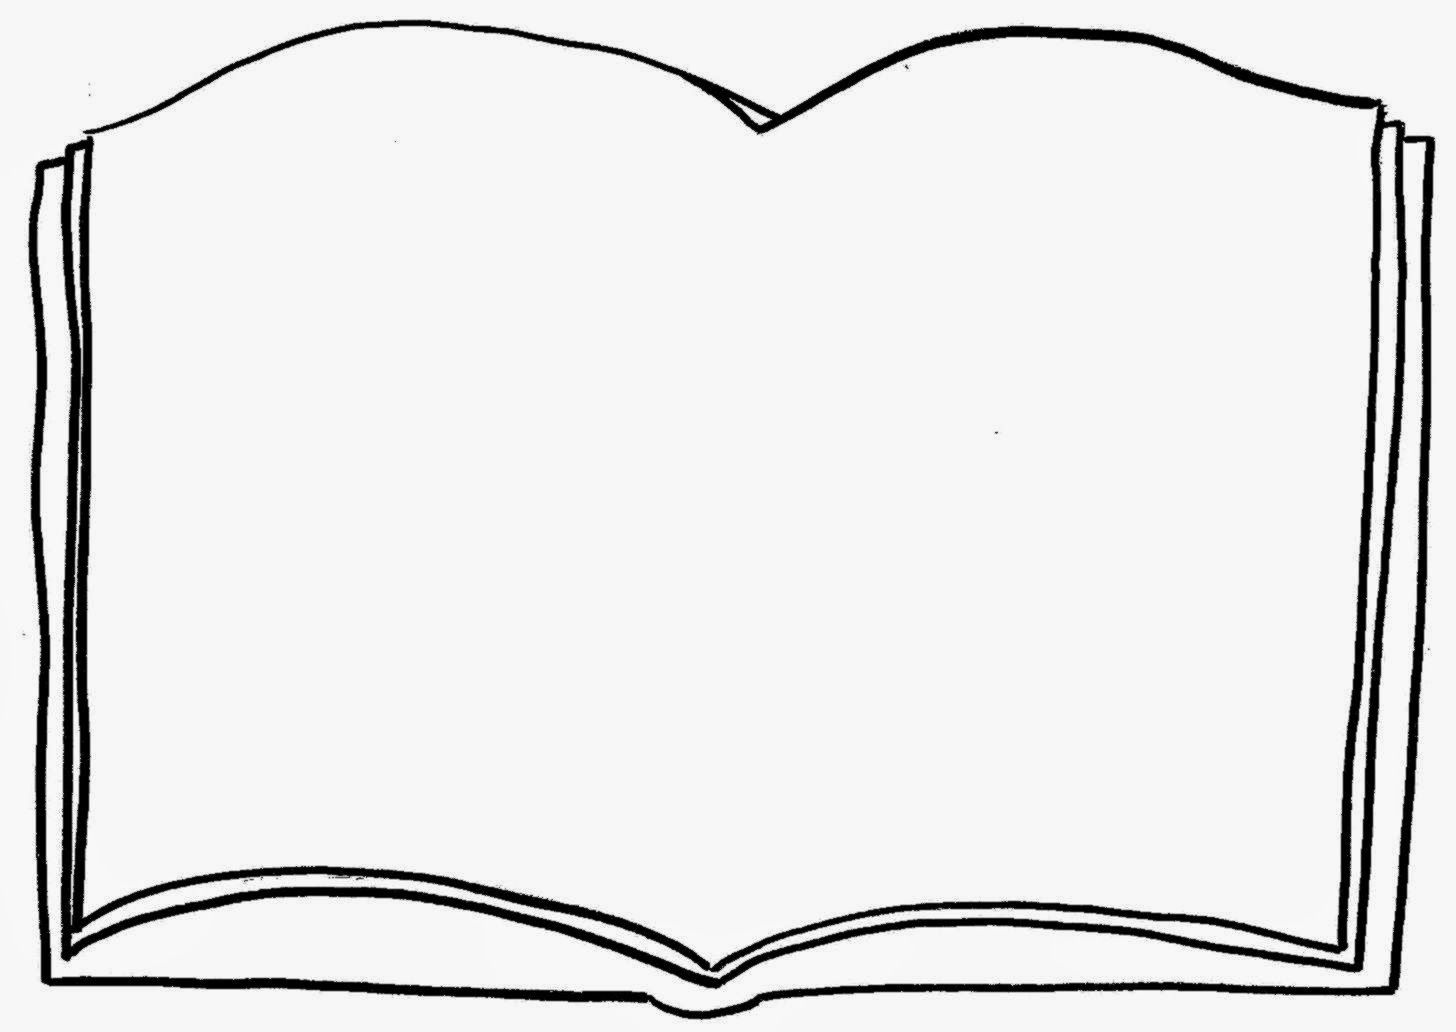 White clipart open book Pencil and in color white clipart open book moziru